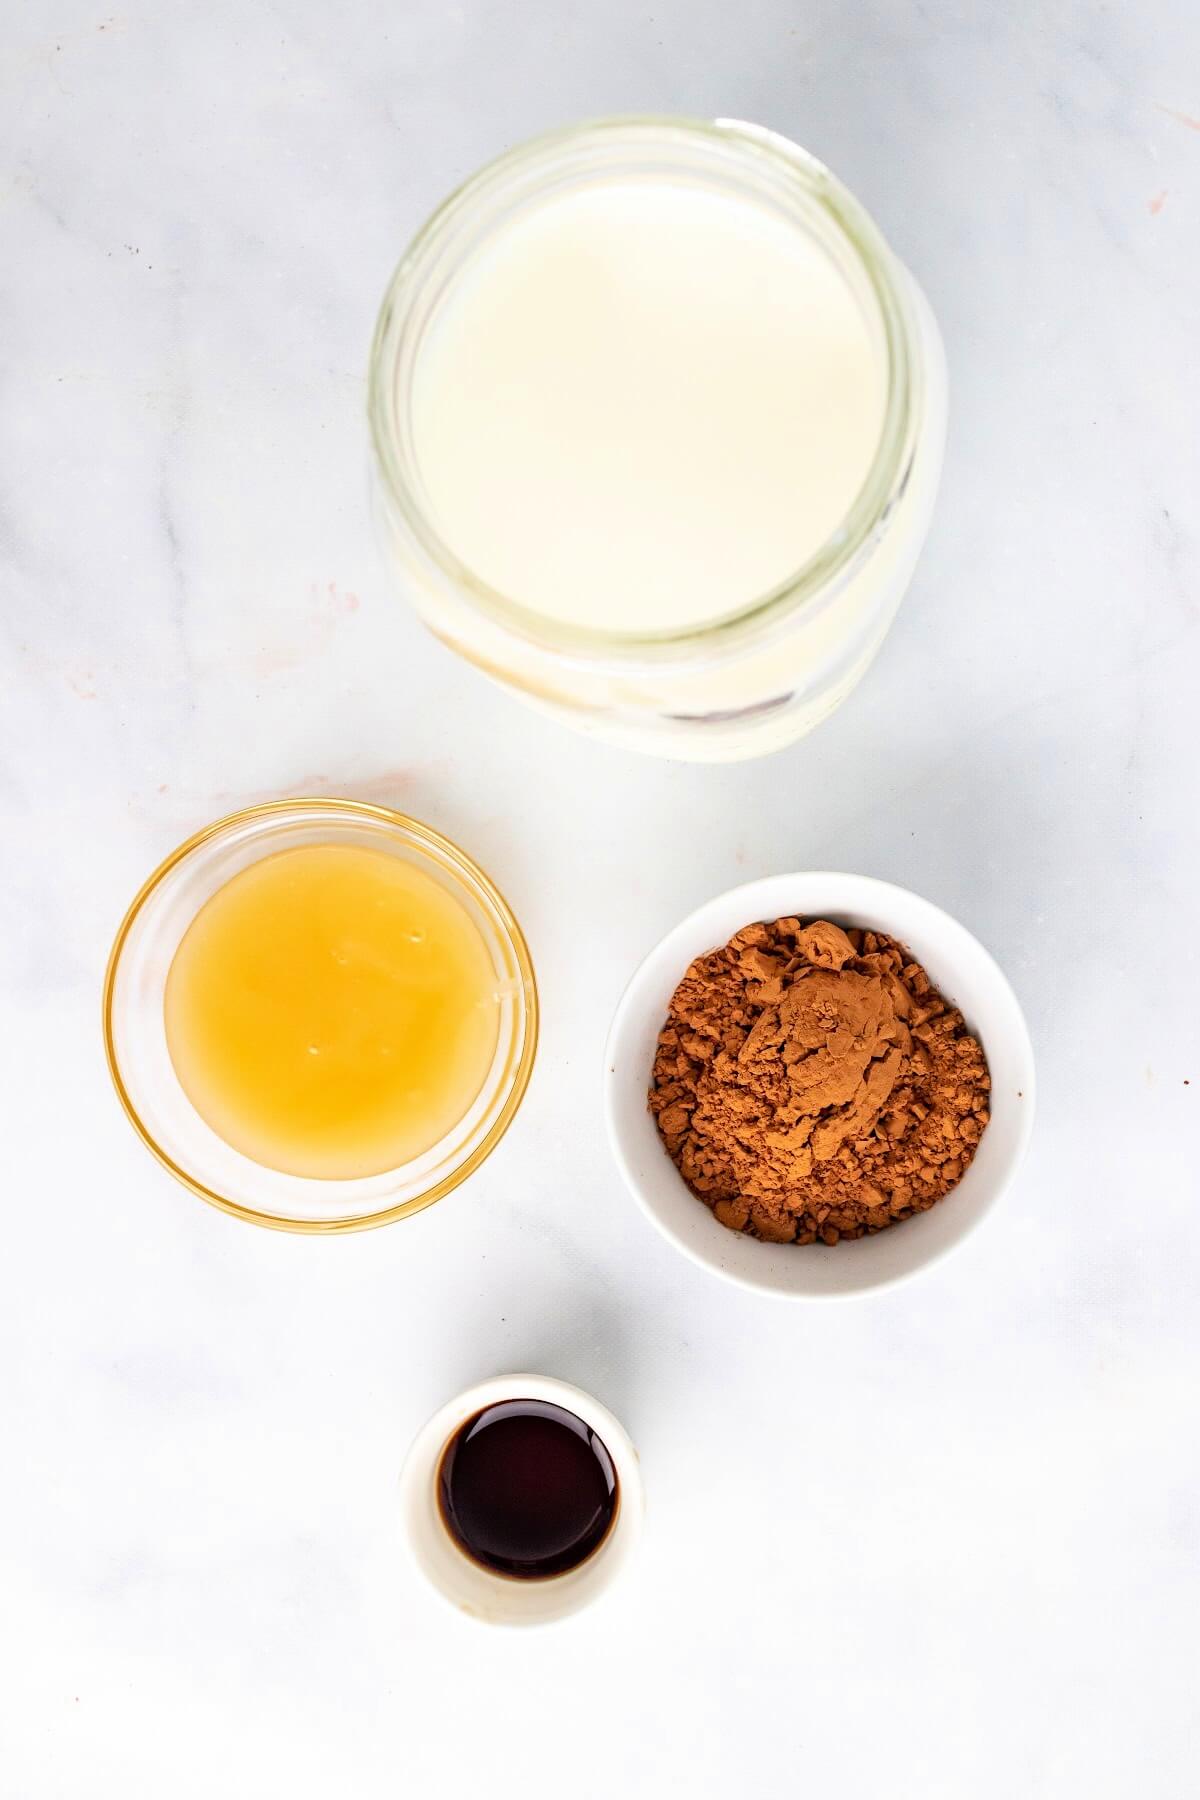 Overhead view of a glass jar filled with milk, small glass bowl filled with honey, small bowl filled with cocoa powder and a mini bowl filled with vanilla extract.